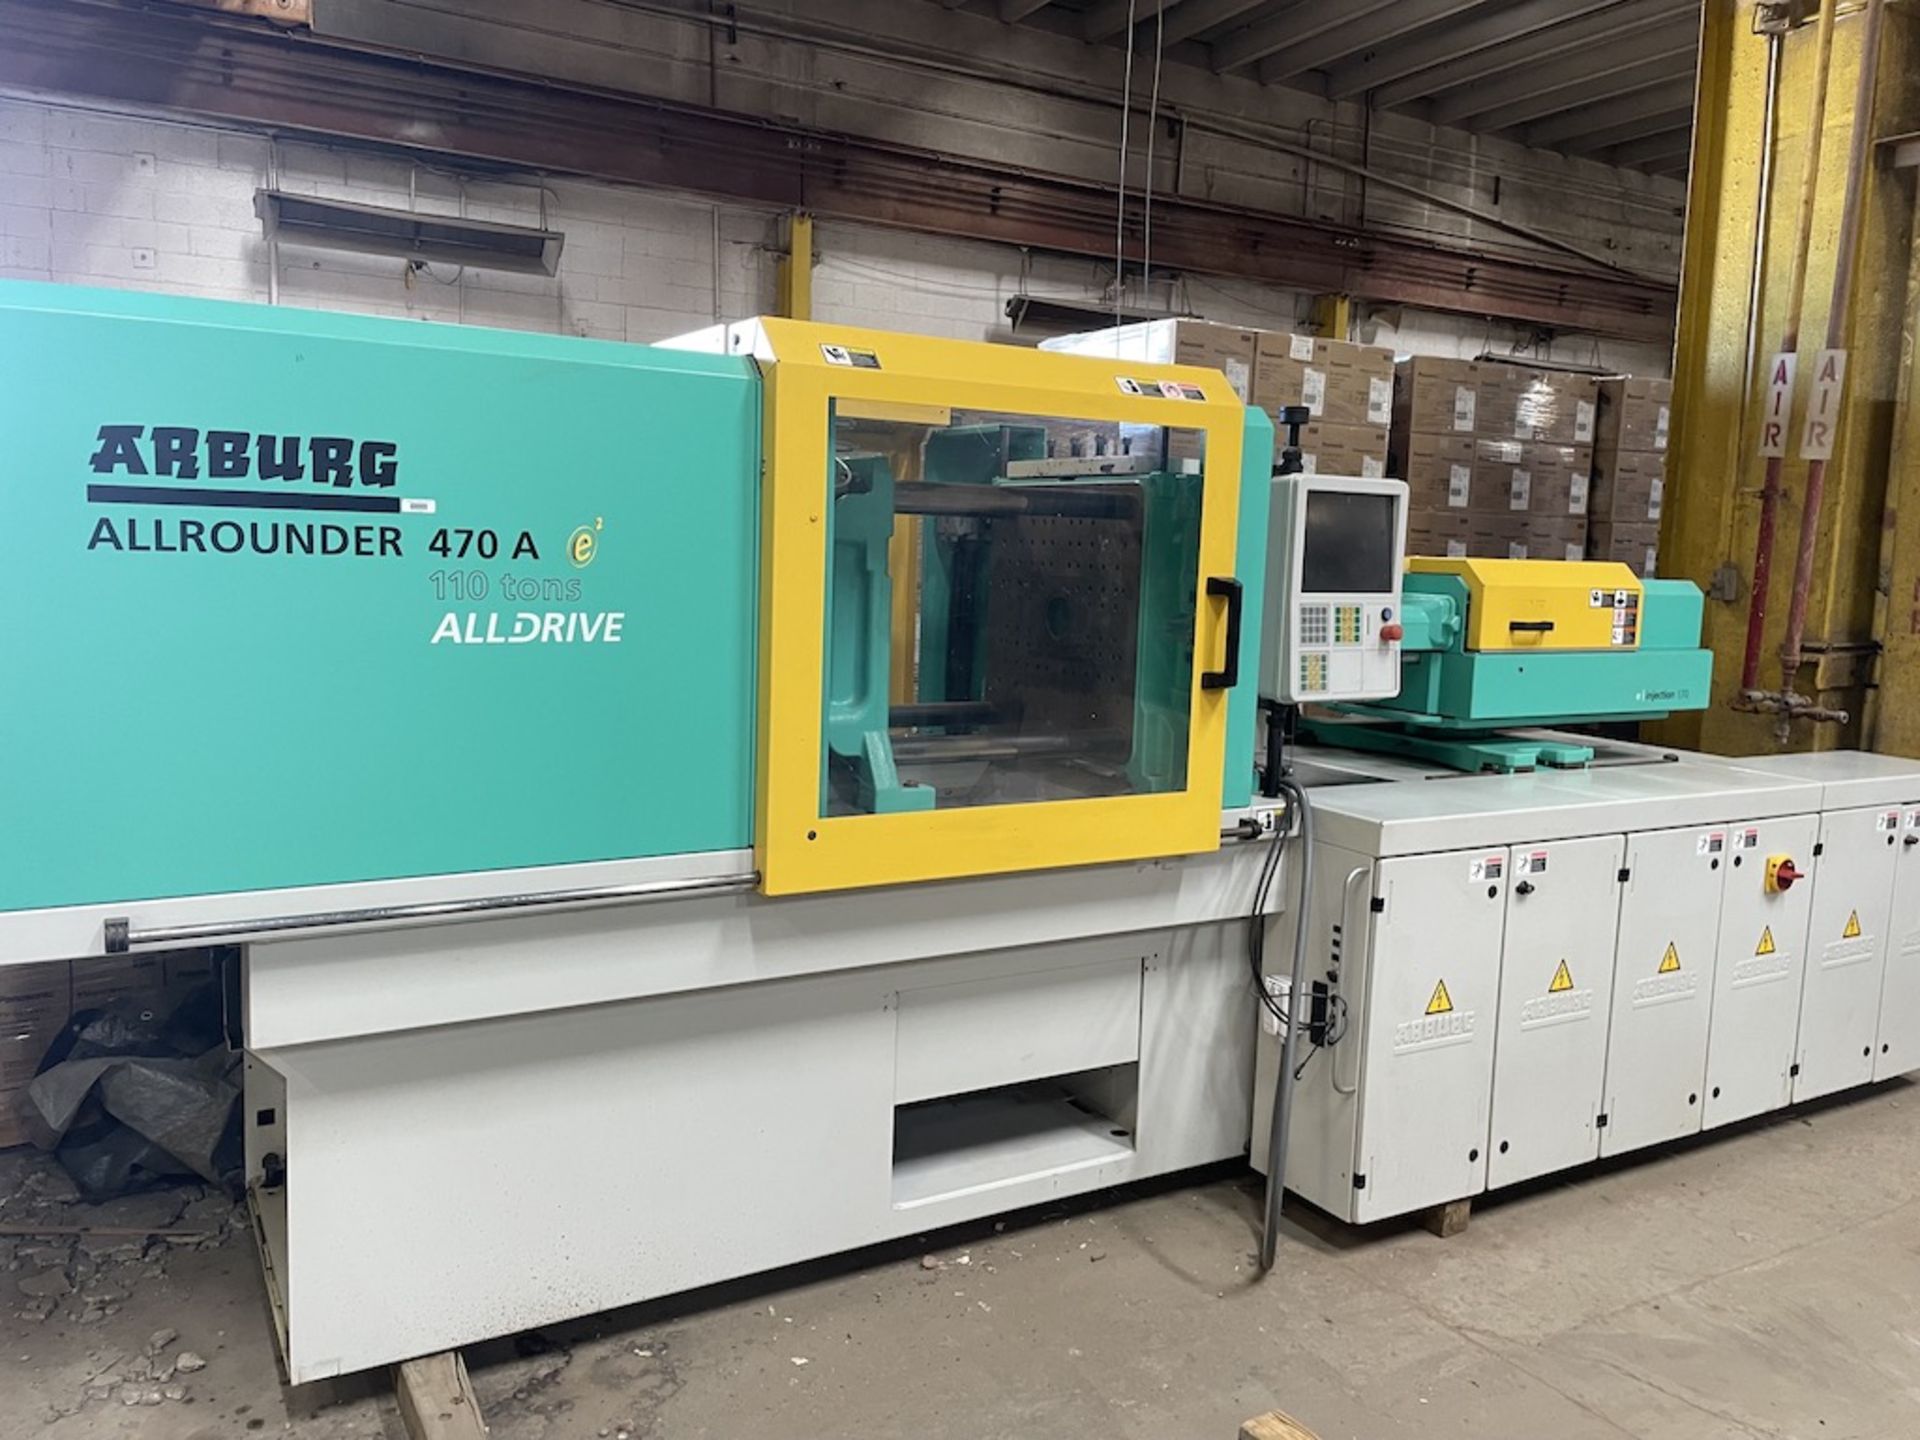 Arburg 110 Ton All Electric Injection Molding Press, New in 2014 - Image 3 of 6